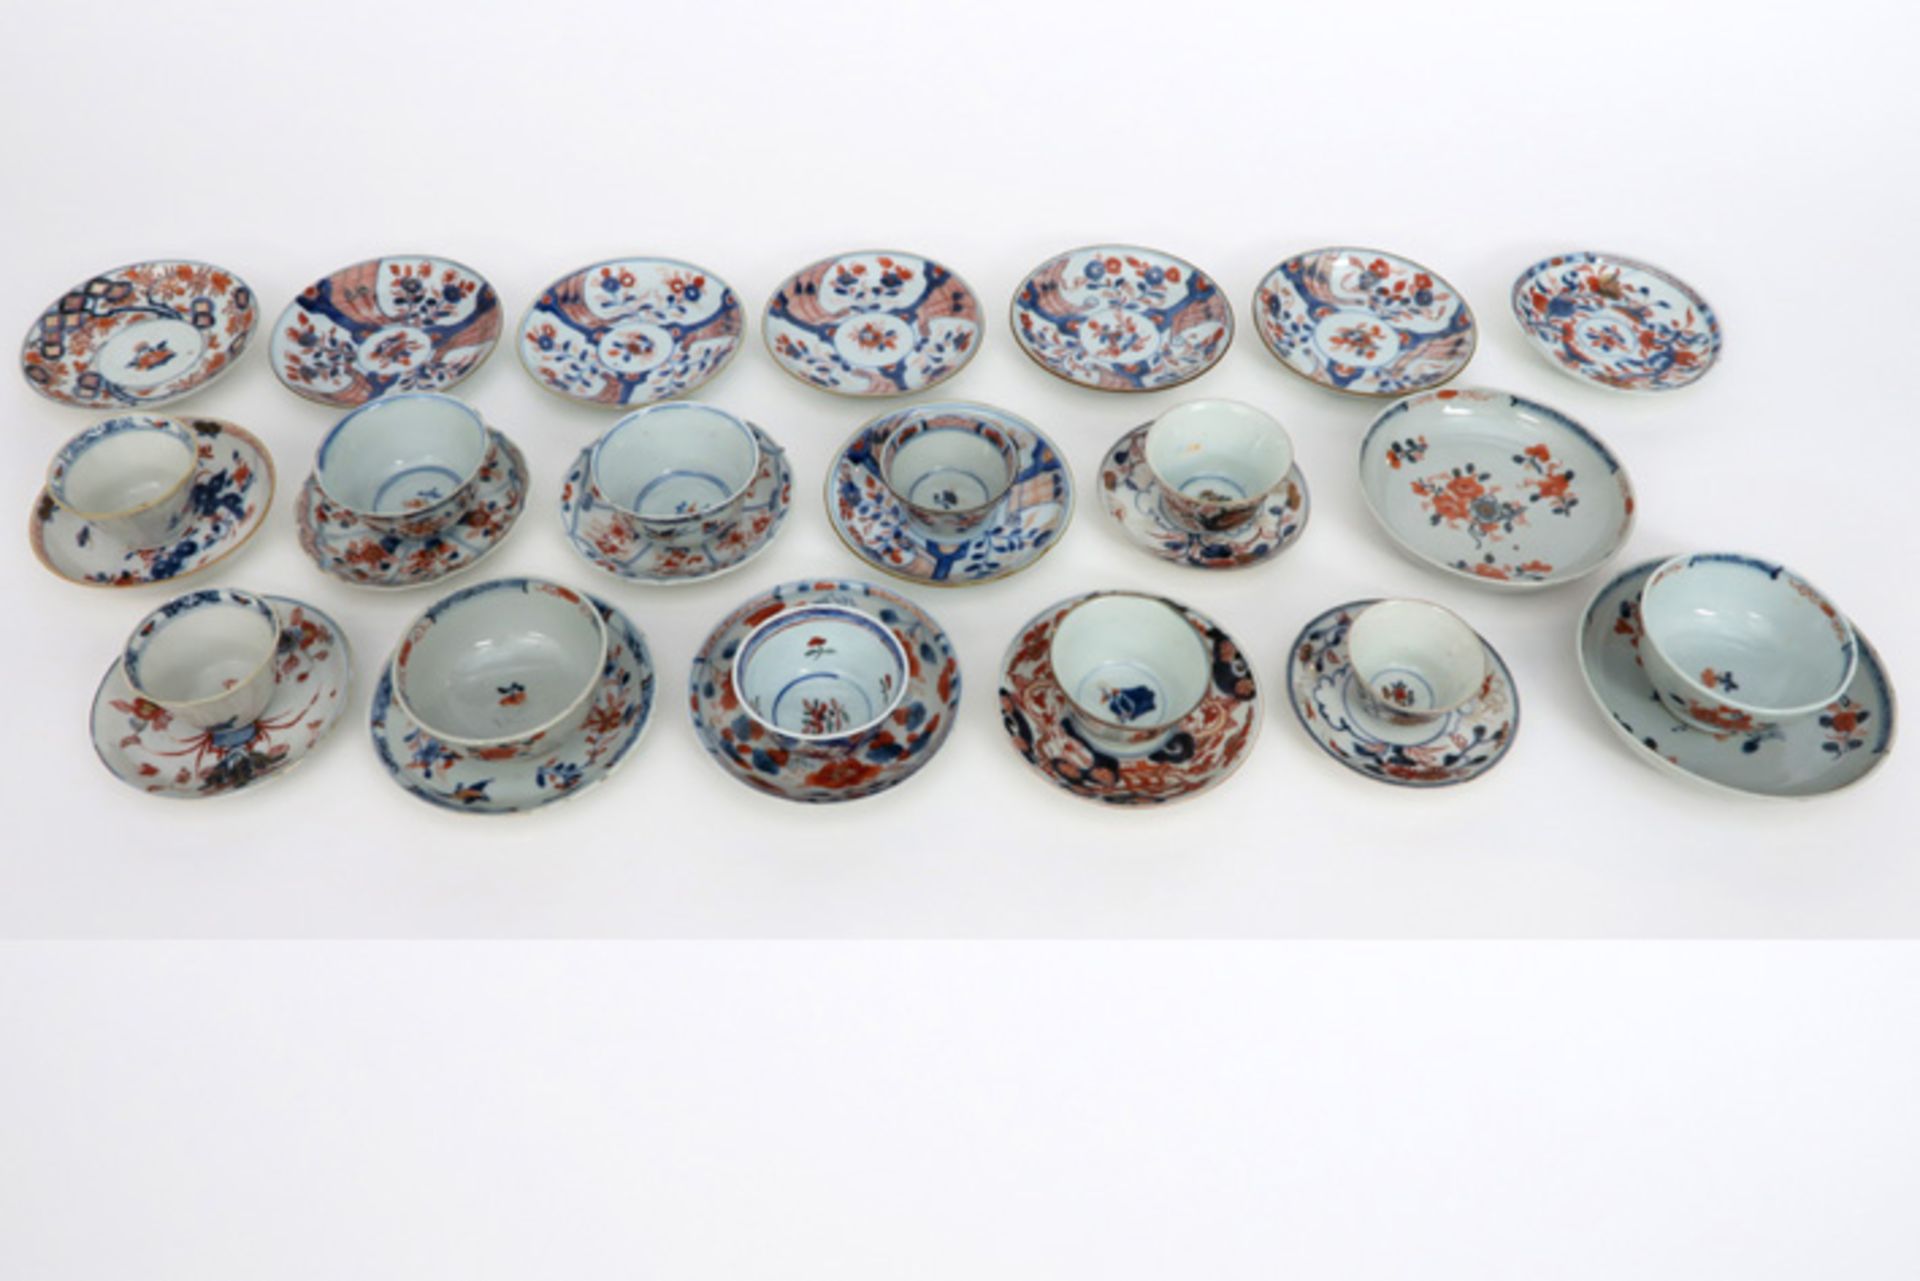 30 cups and saucers in 18th Cent. Chinese porcelain with Imari decor || Lot van 30 tasjes en - Image 2 of 2